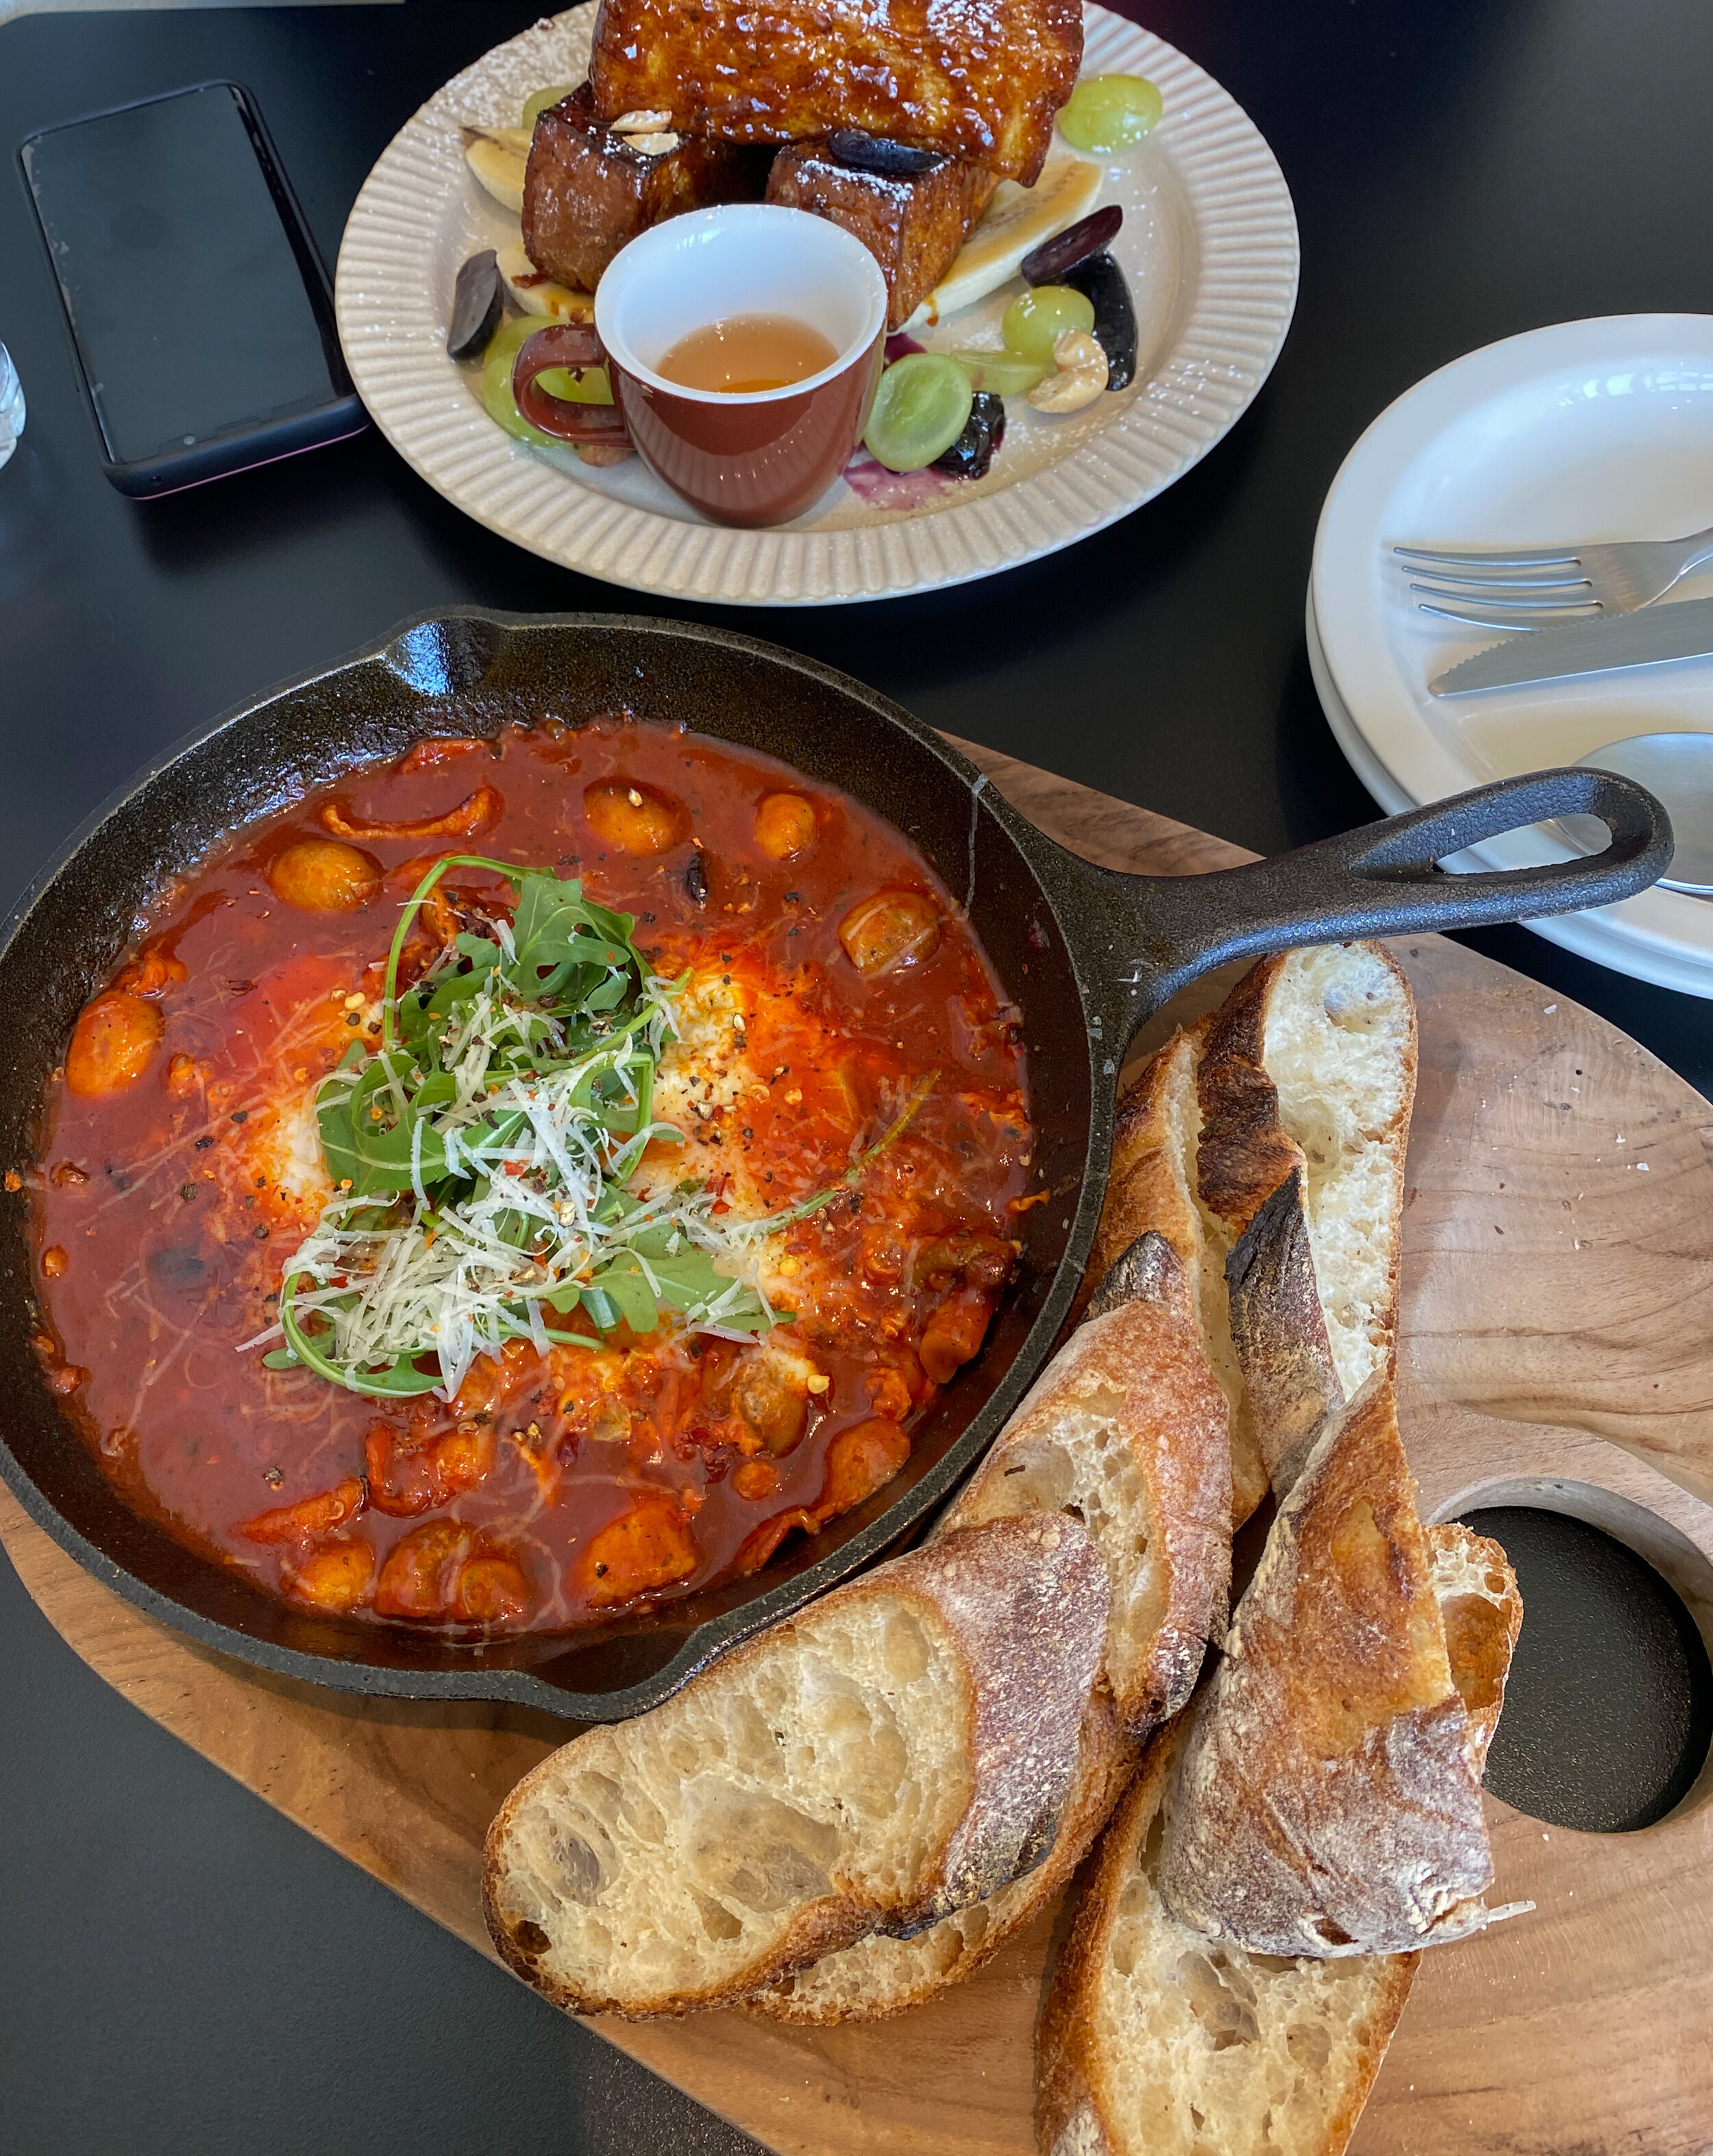 yummy but shakshuka was too heavy on a warm day